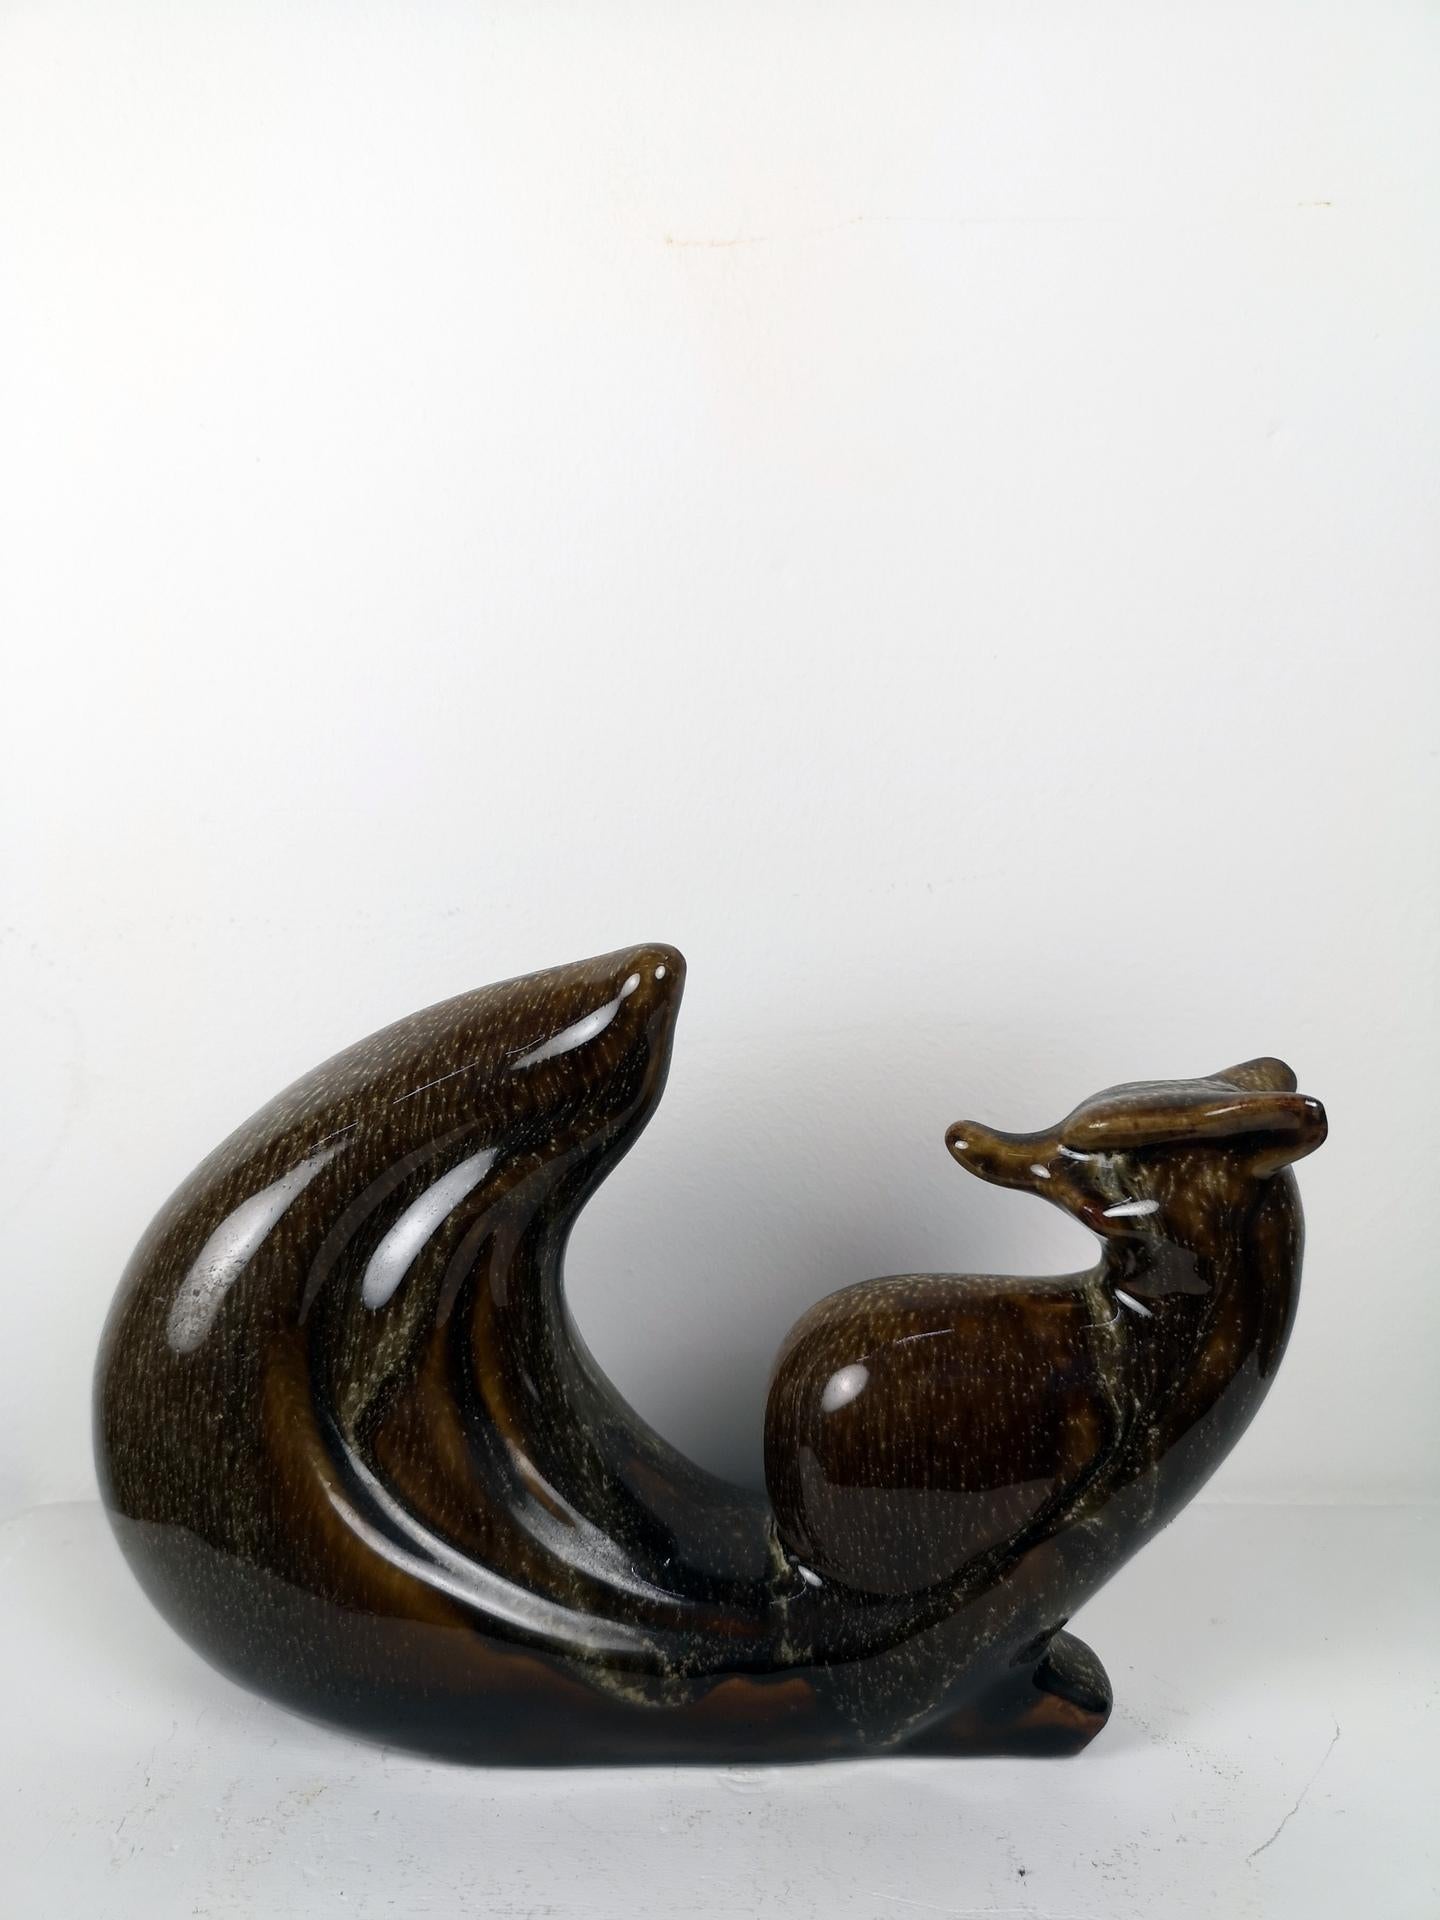 This larged tailed brown ceramic fox was made in the 1960s, probably in the USSR.